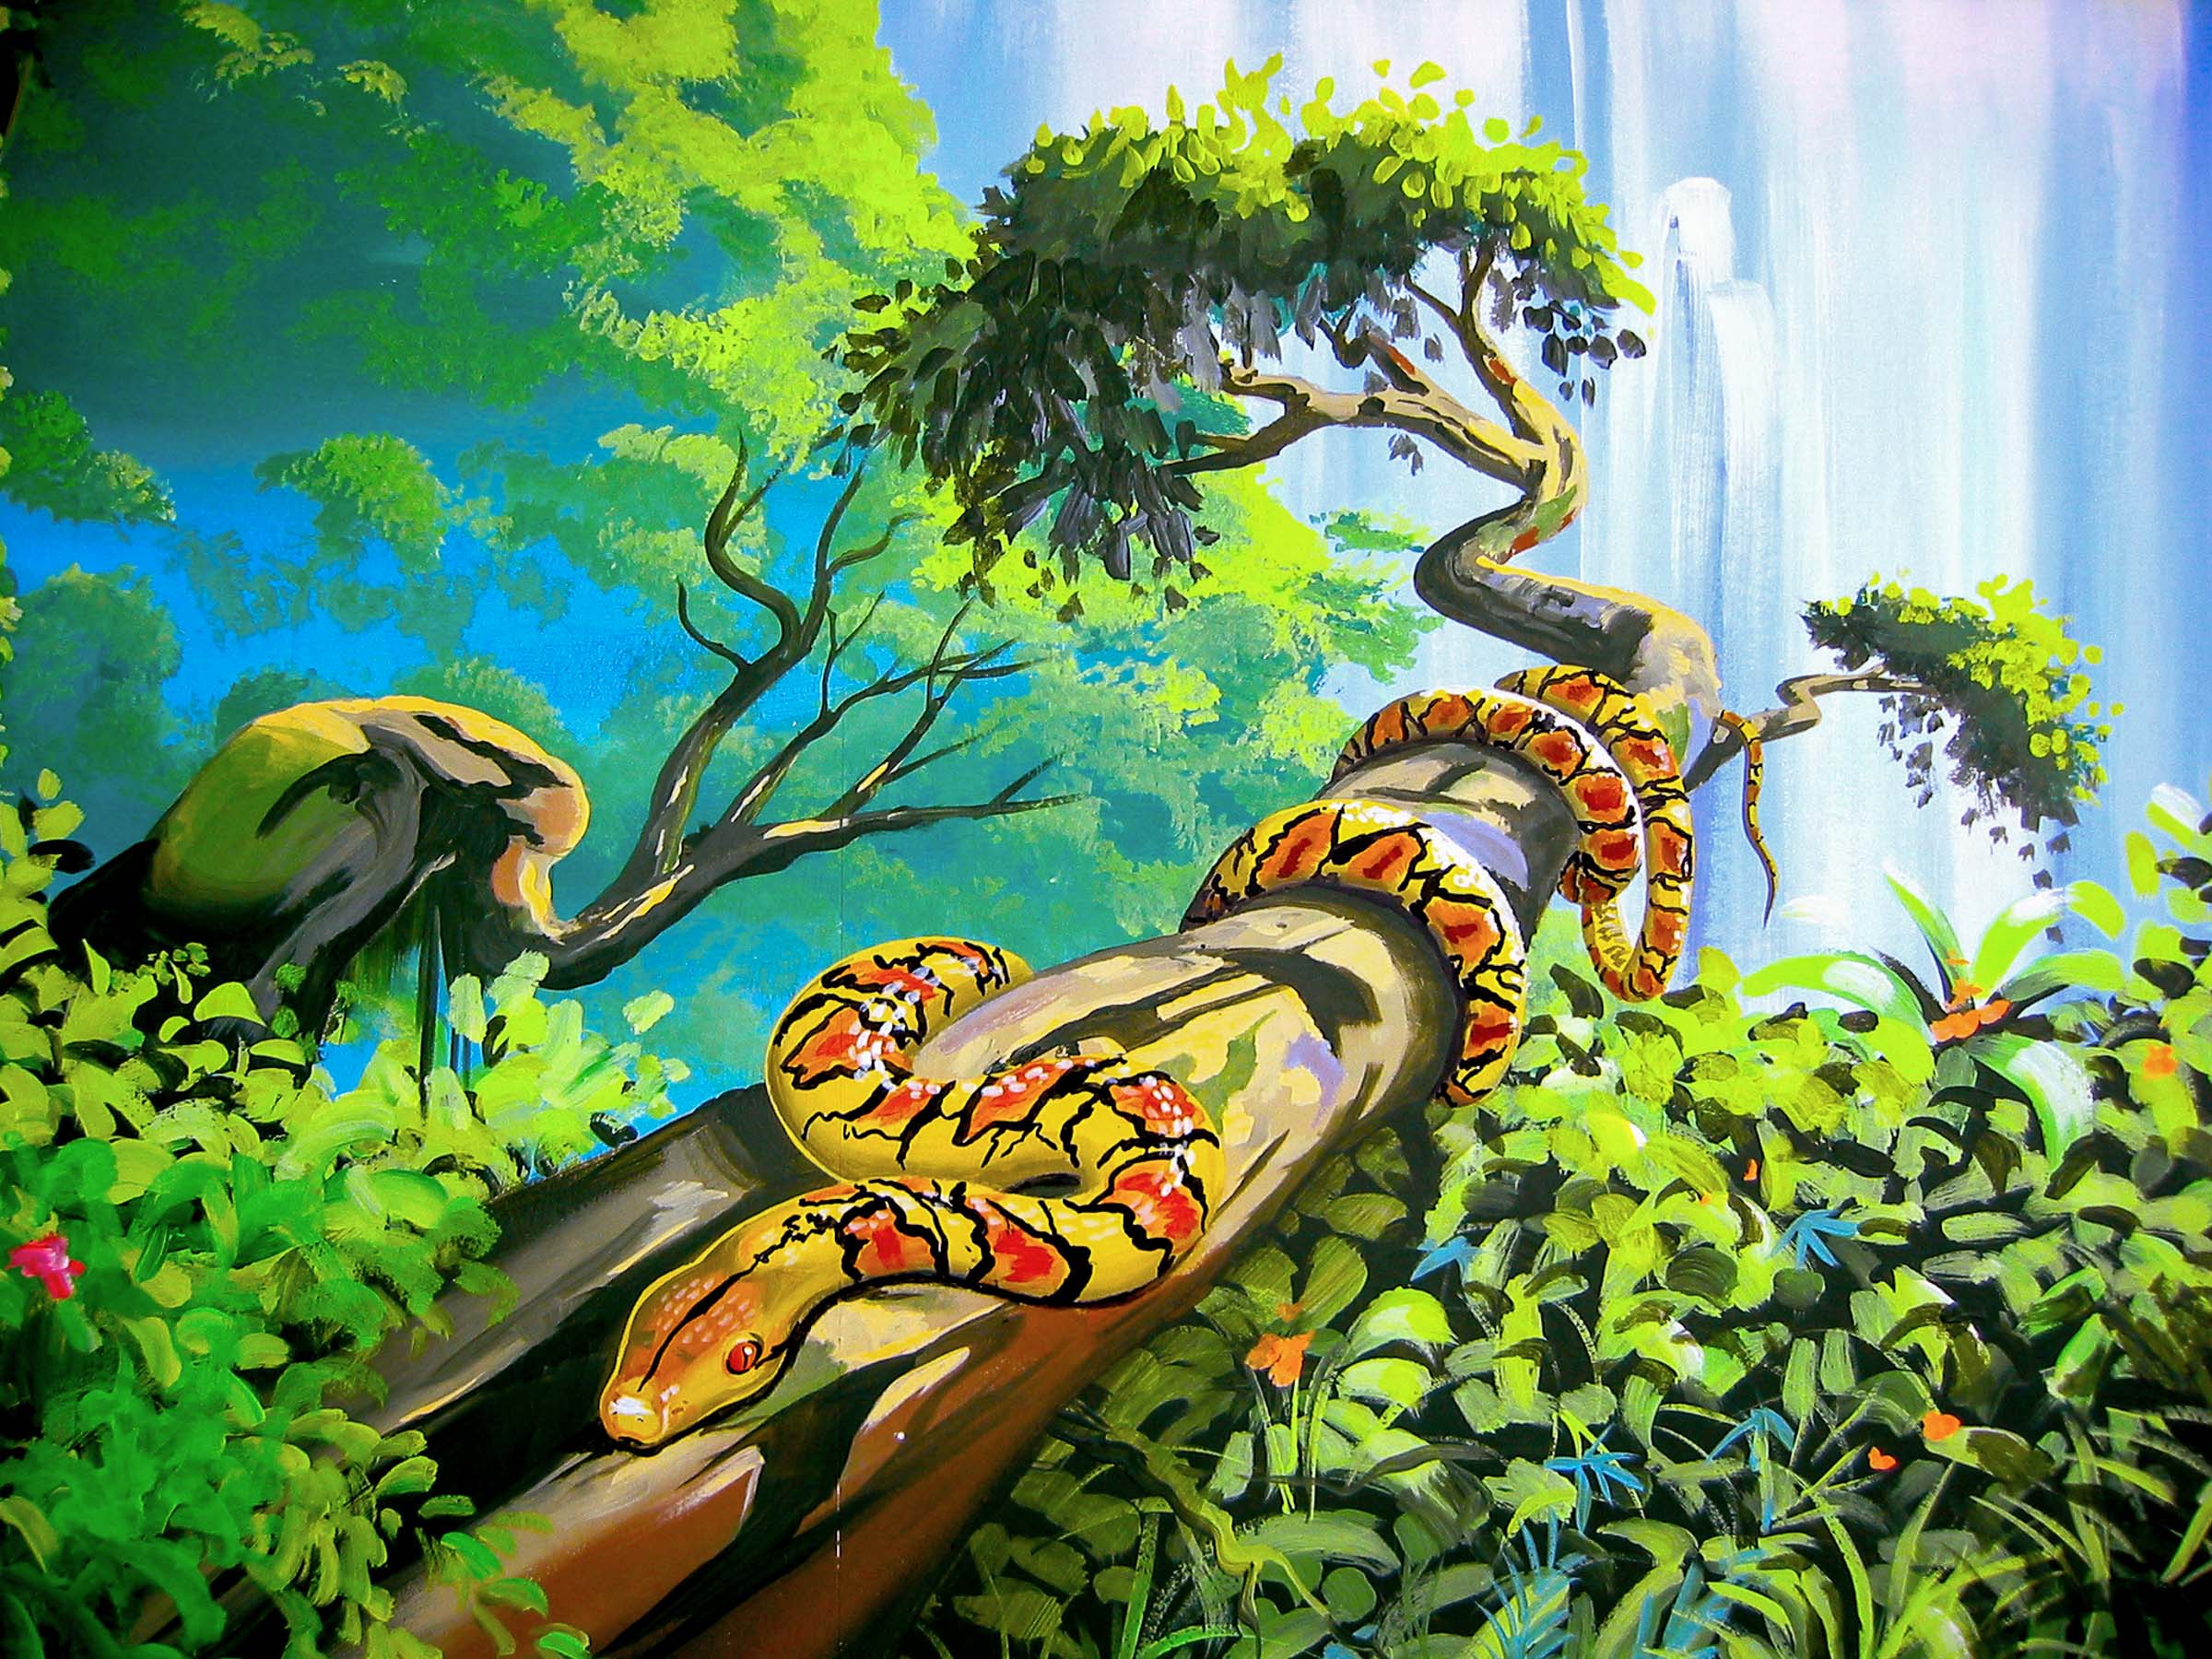 Jungle mural snake wrapped around branch detail